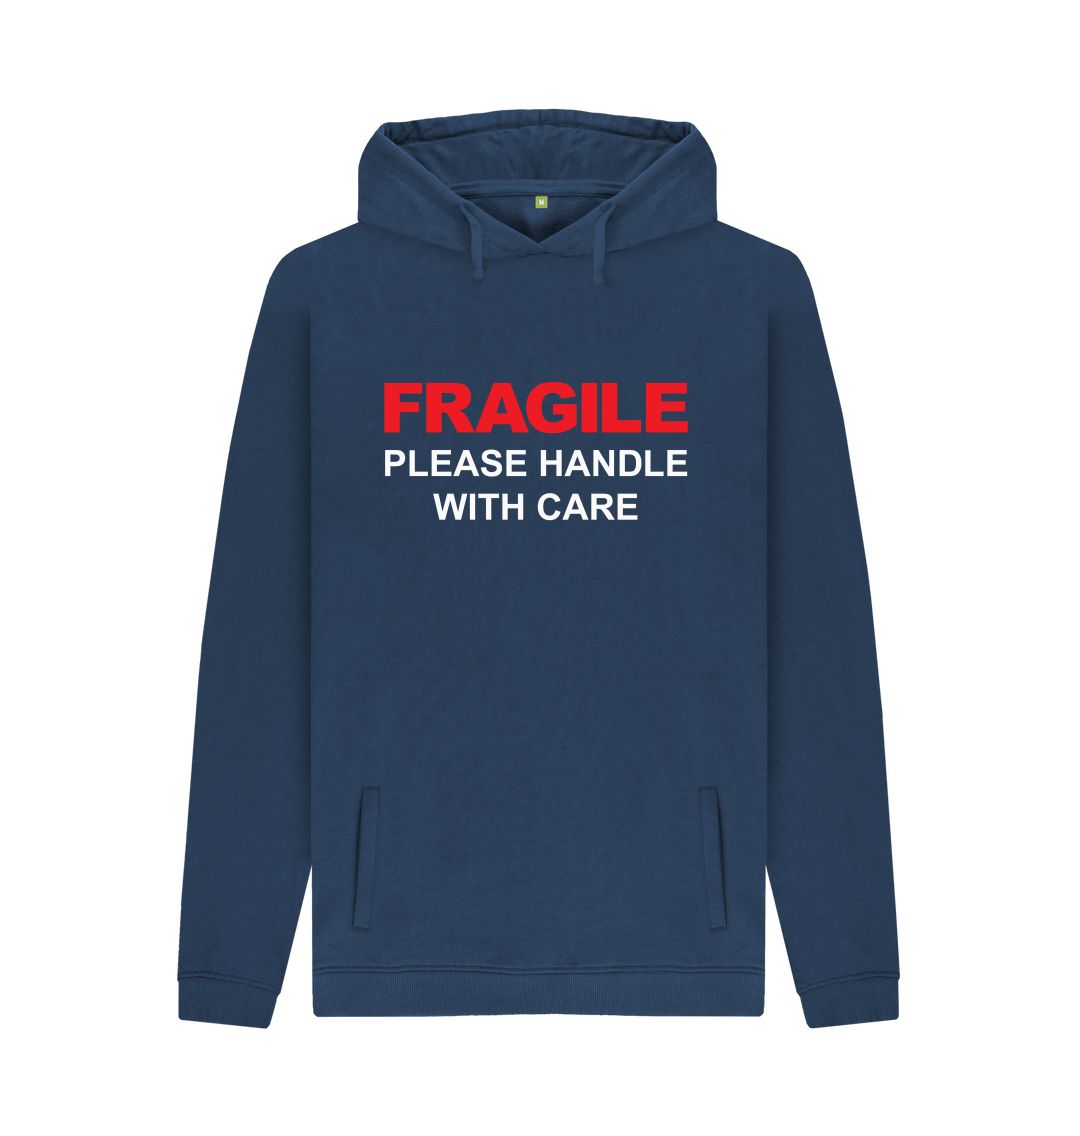 Fragile - Please Handle With Care Jumper